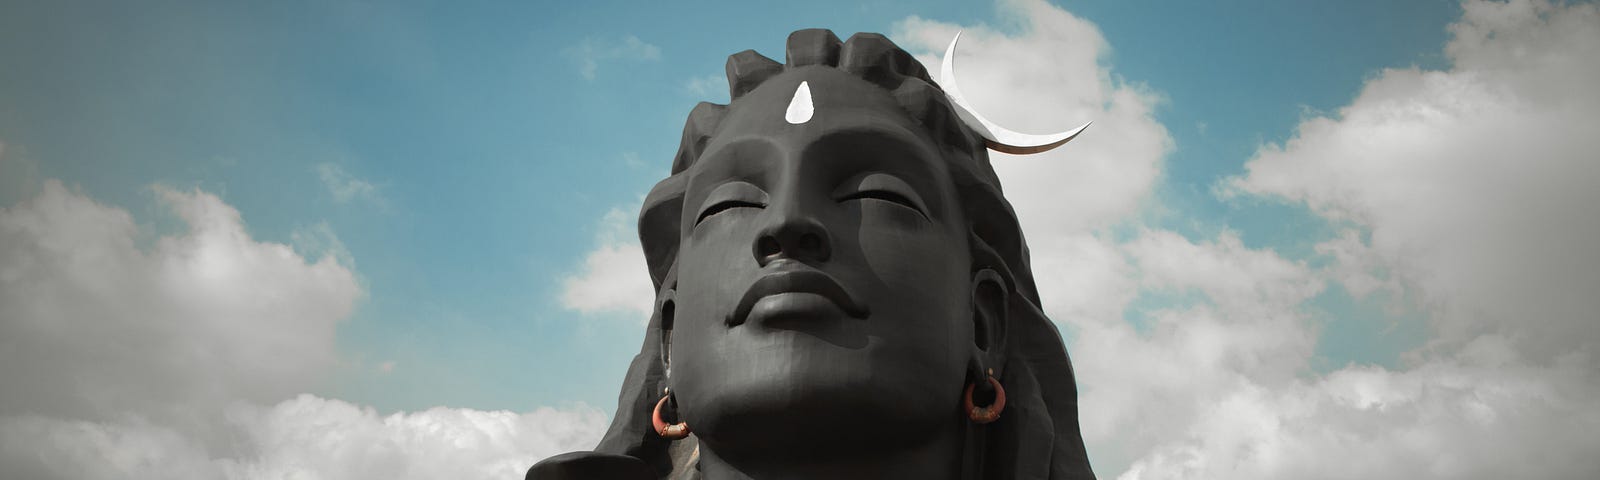 A statue of a long-haired woman in stone from the neck up, eyes closed, against the backdrop of sky and clouds with a sliver of moon touching the right side of her head. The statue is dark gray all over except for her orange-brown hoop earrings and a large white teardrop shape on her forehead.